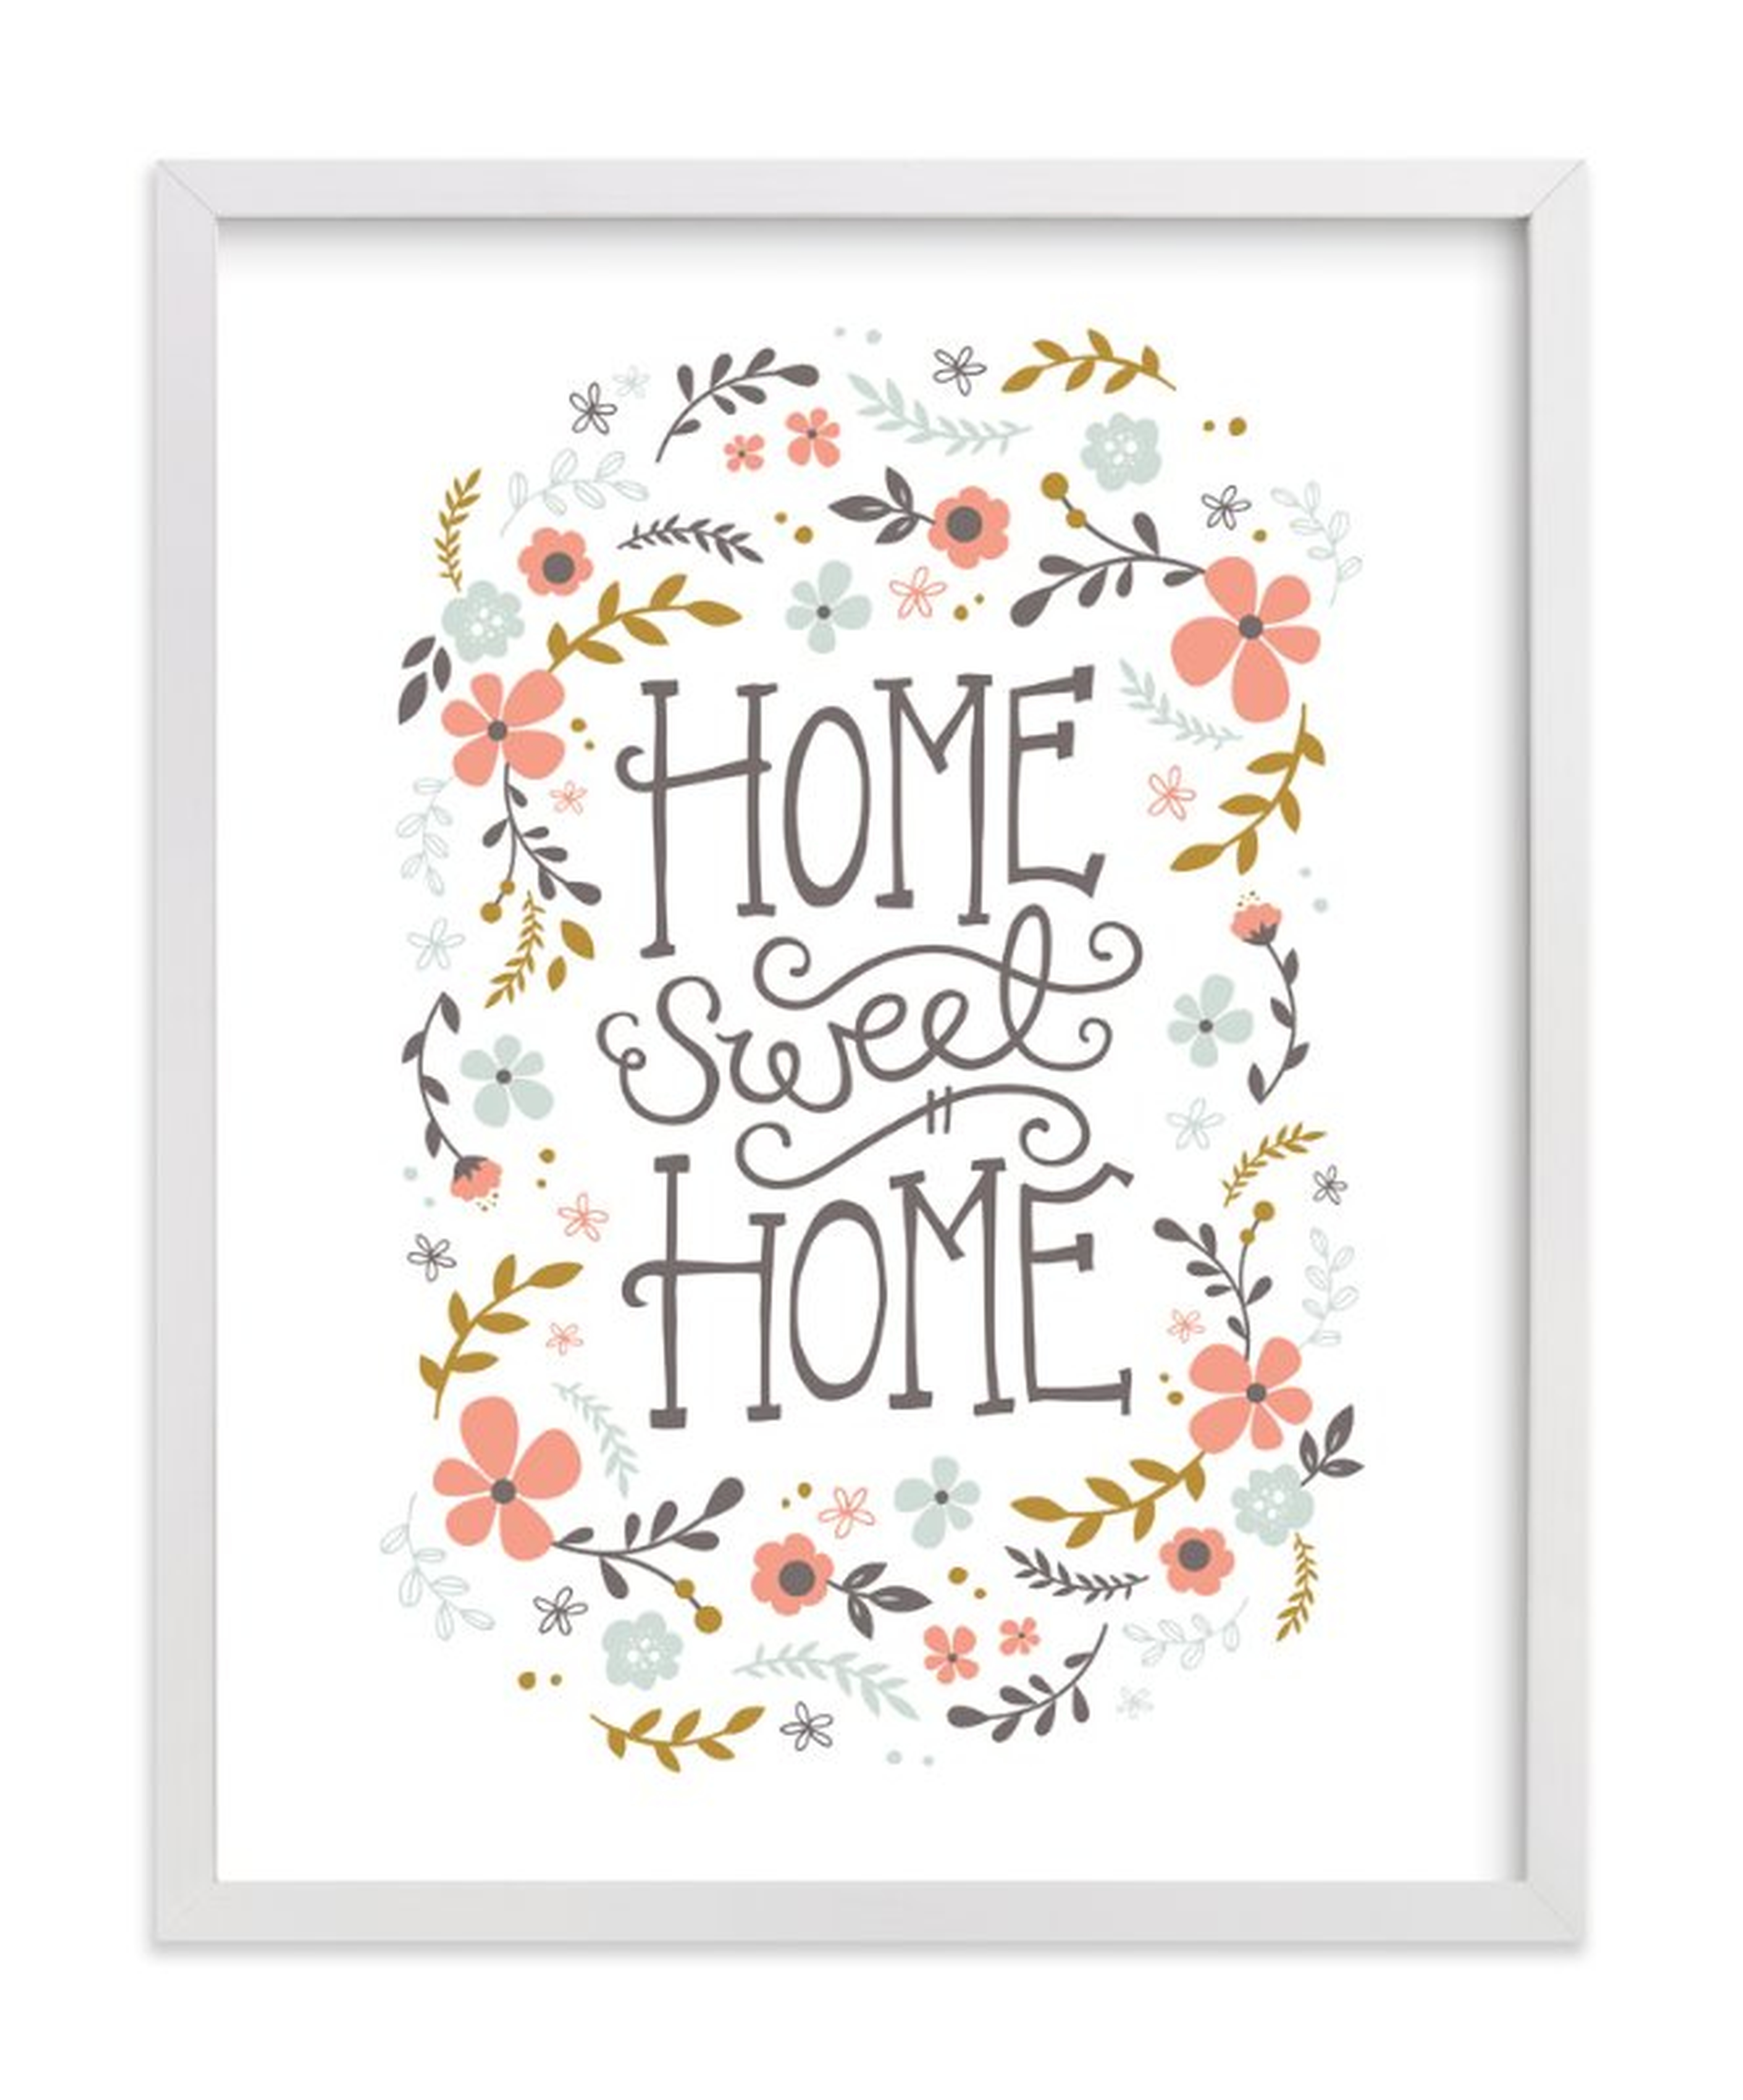 Home Sweet Home Limited Edition Art Print - Minted